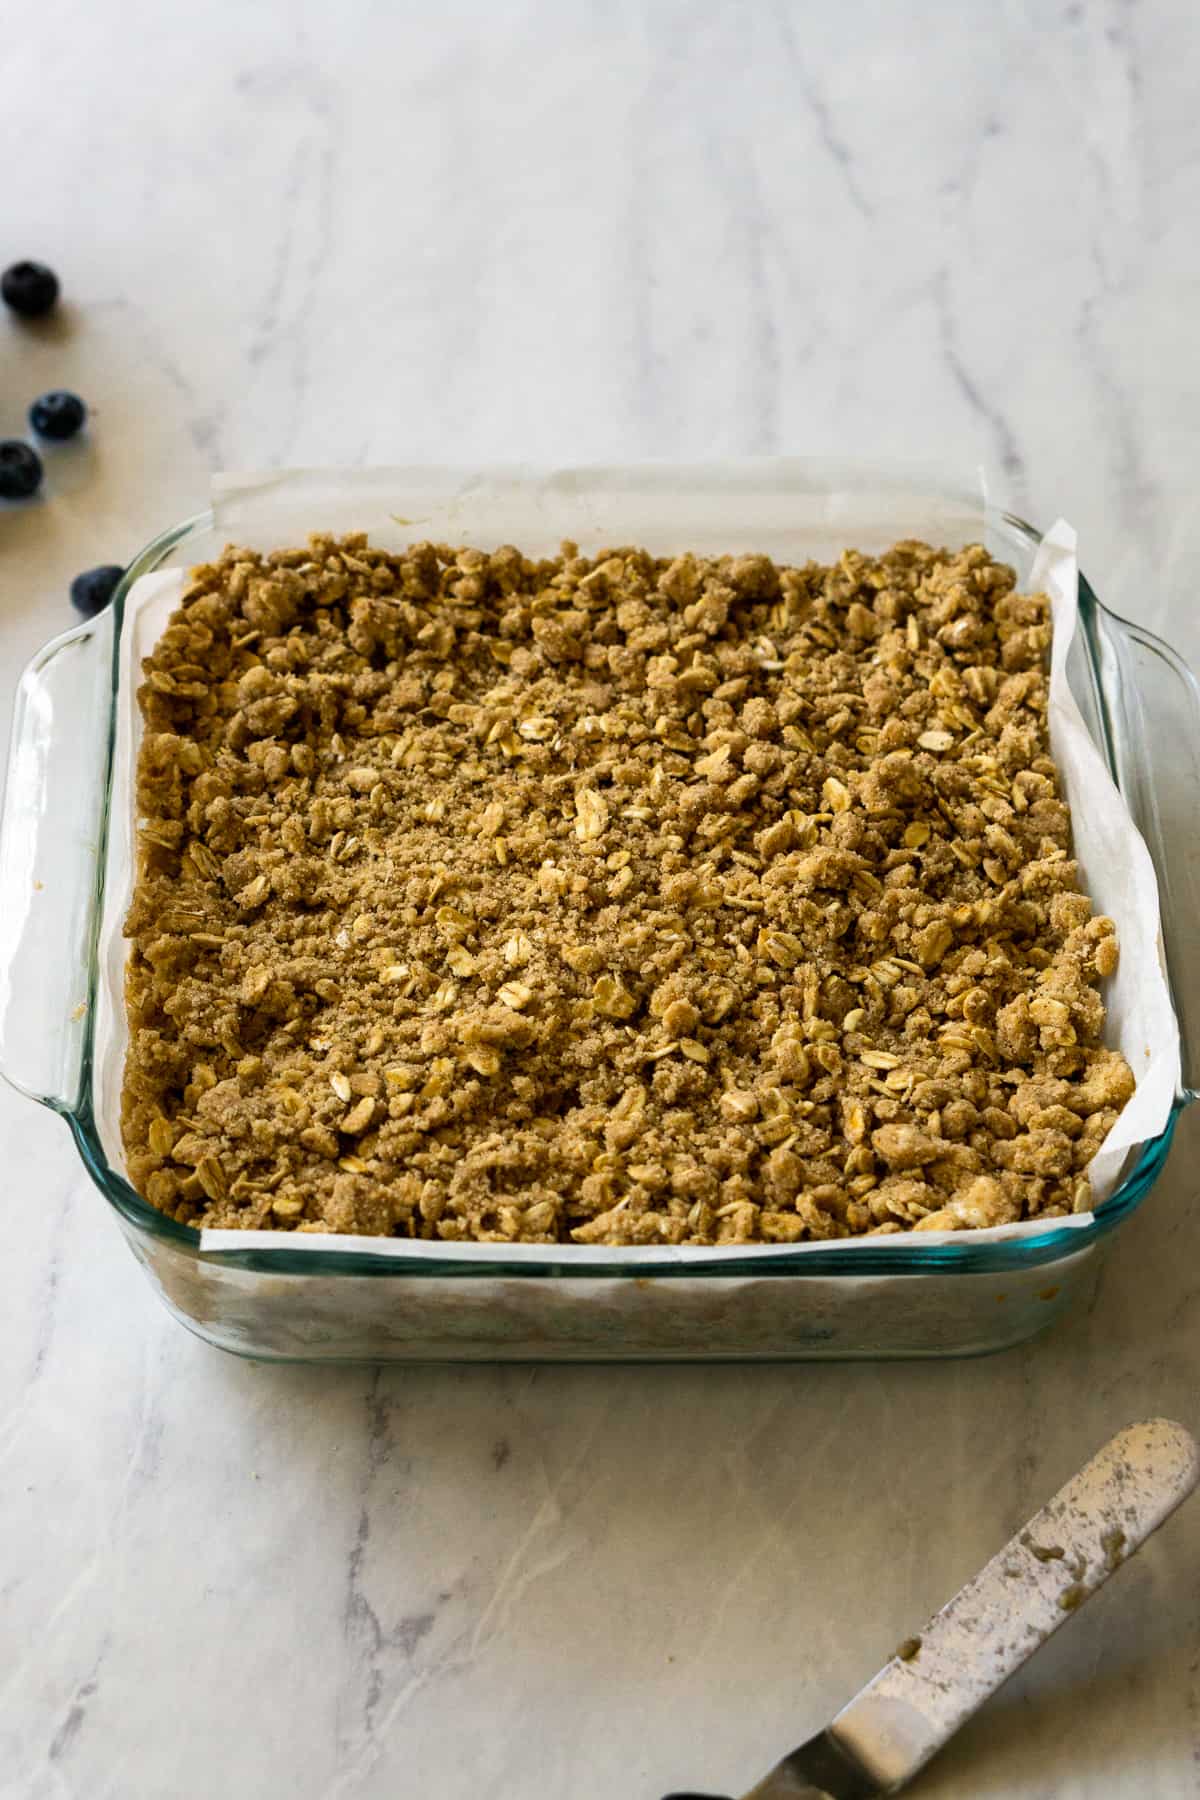 The oat crumble evenly spread across banana blueberry filling and cookie base in an 8x8 inch pan lined with parchment paper. 